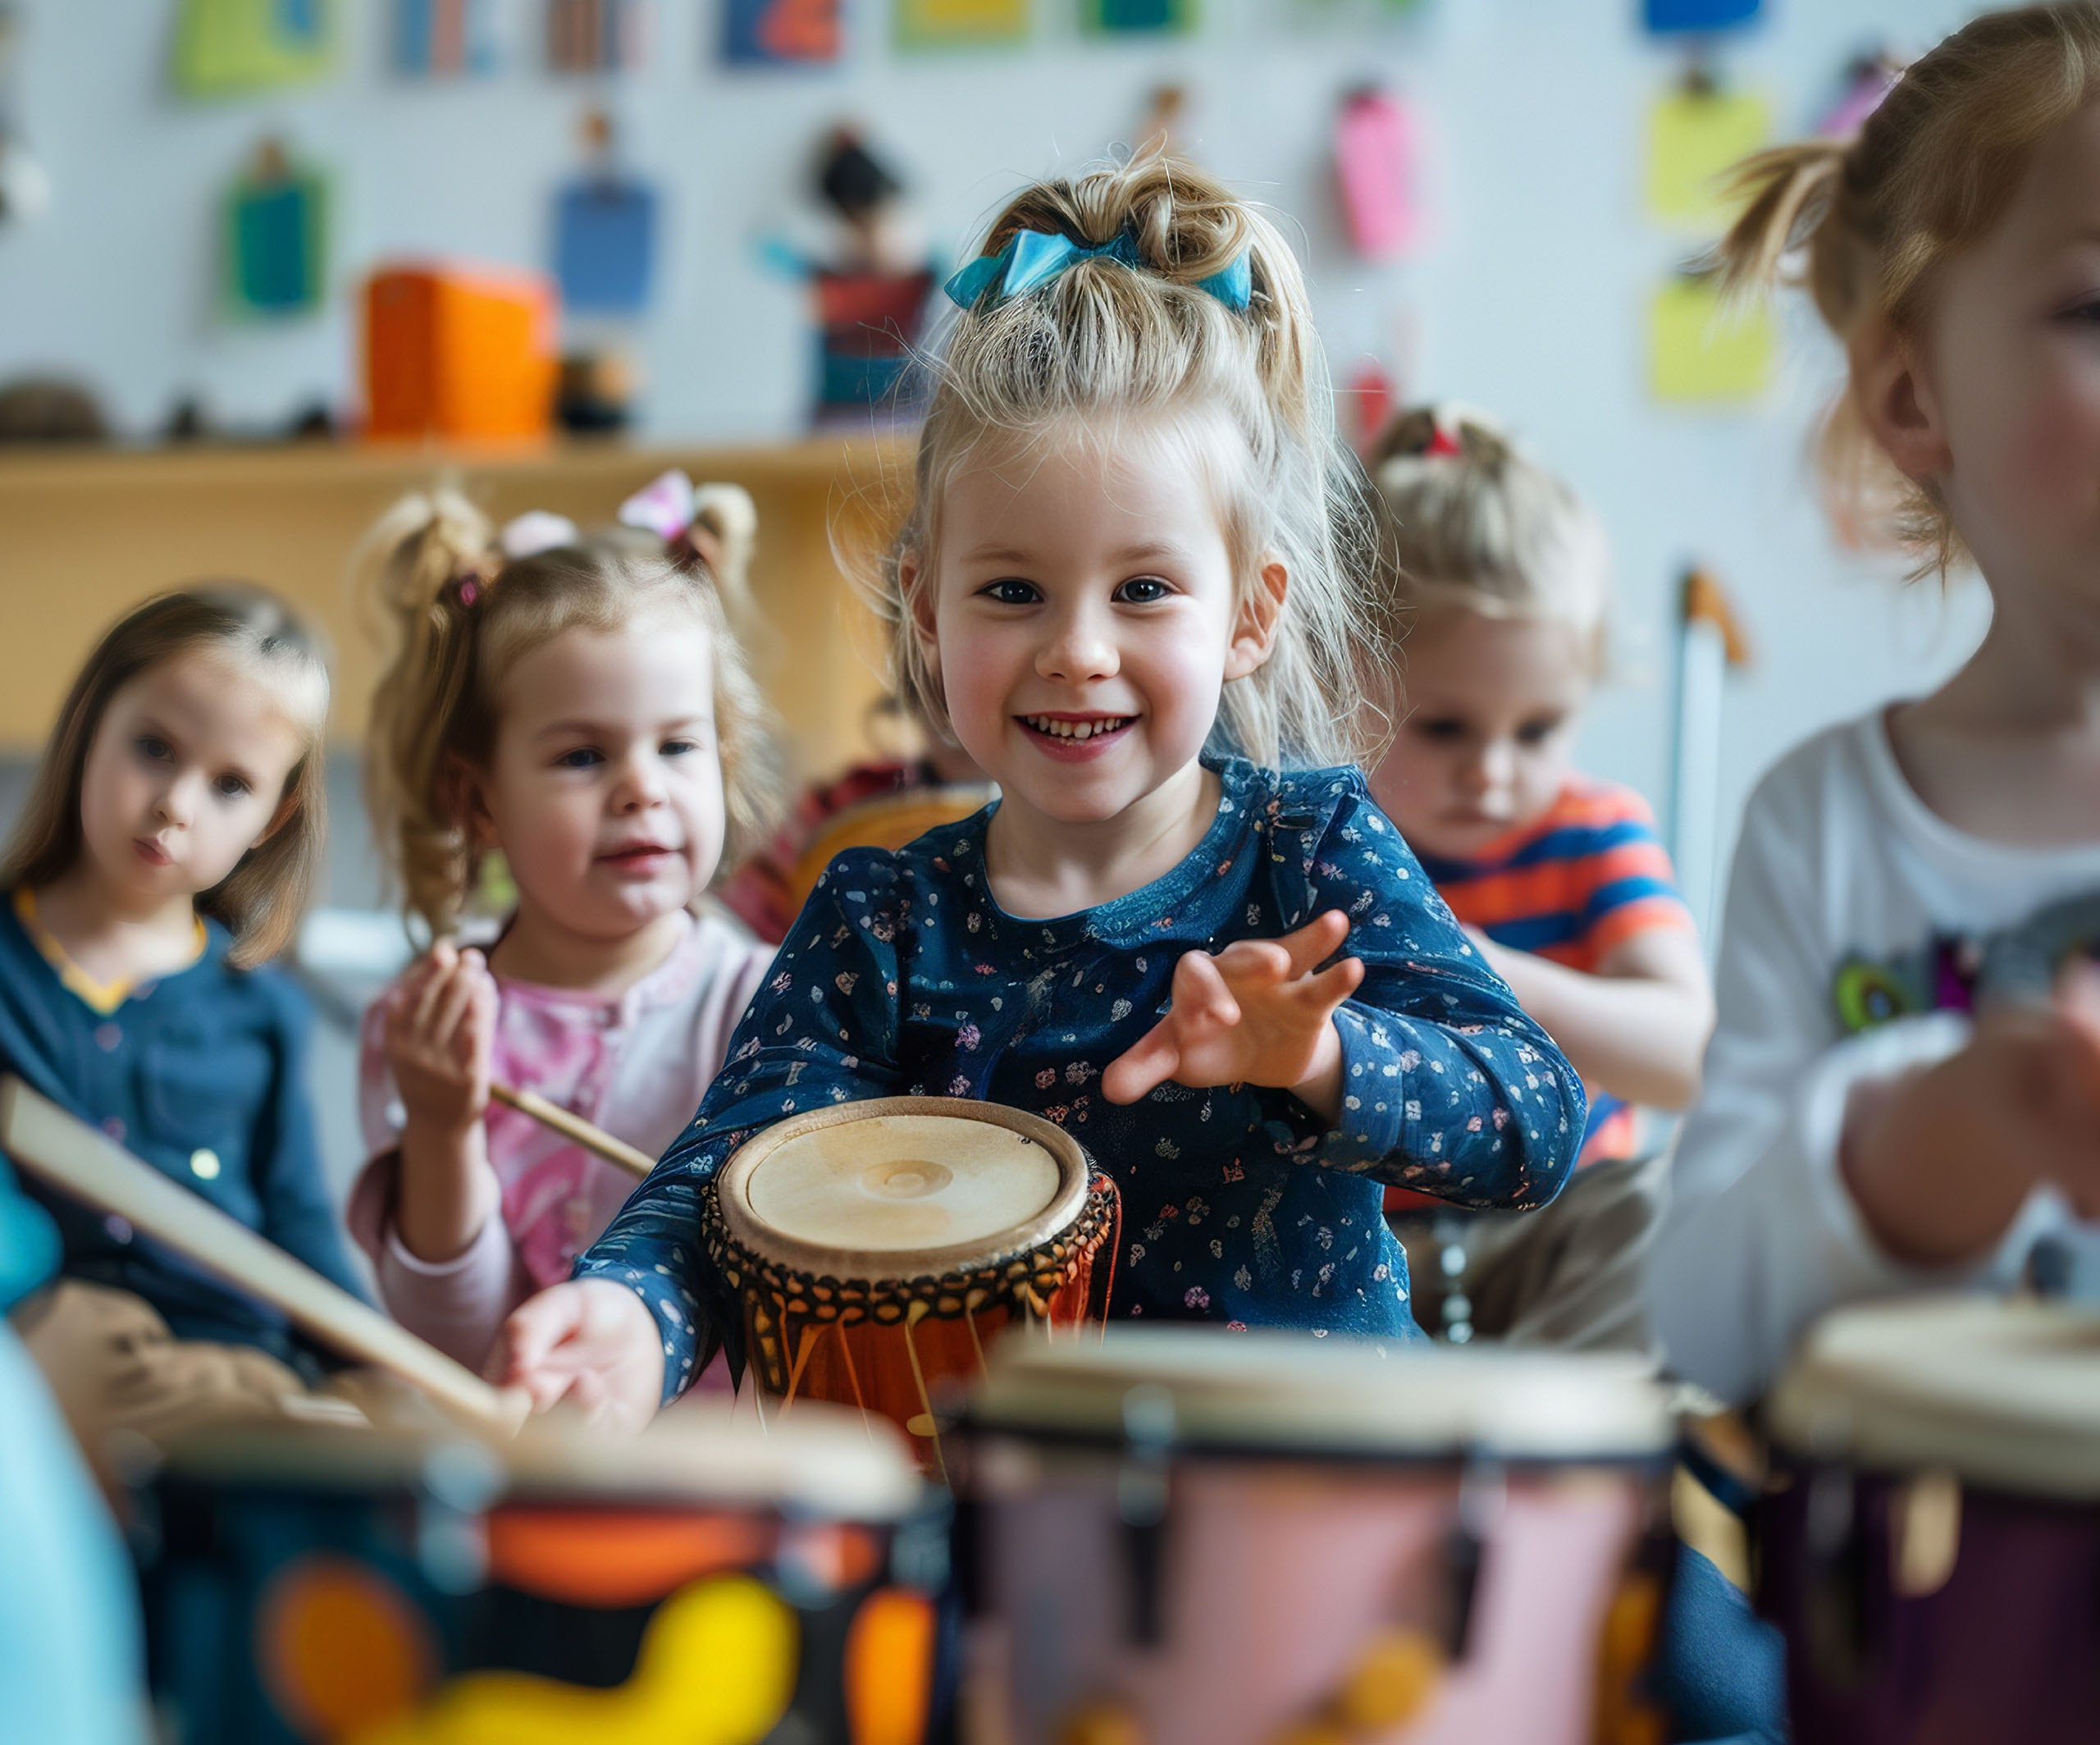 Experience rhythms from Asia, Africa, the Middle East and the Pacific these school holidays at this an interactive drumming workshop, presented by Drum Beats.